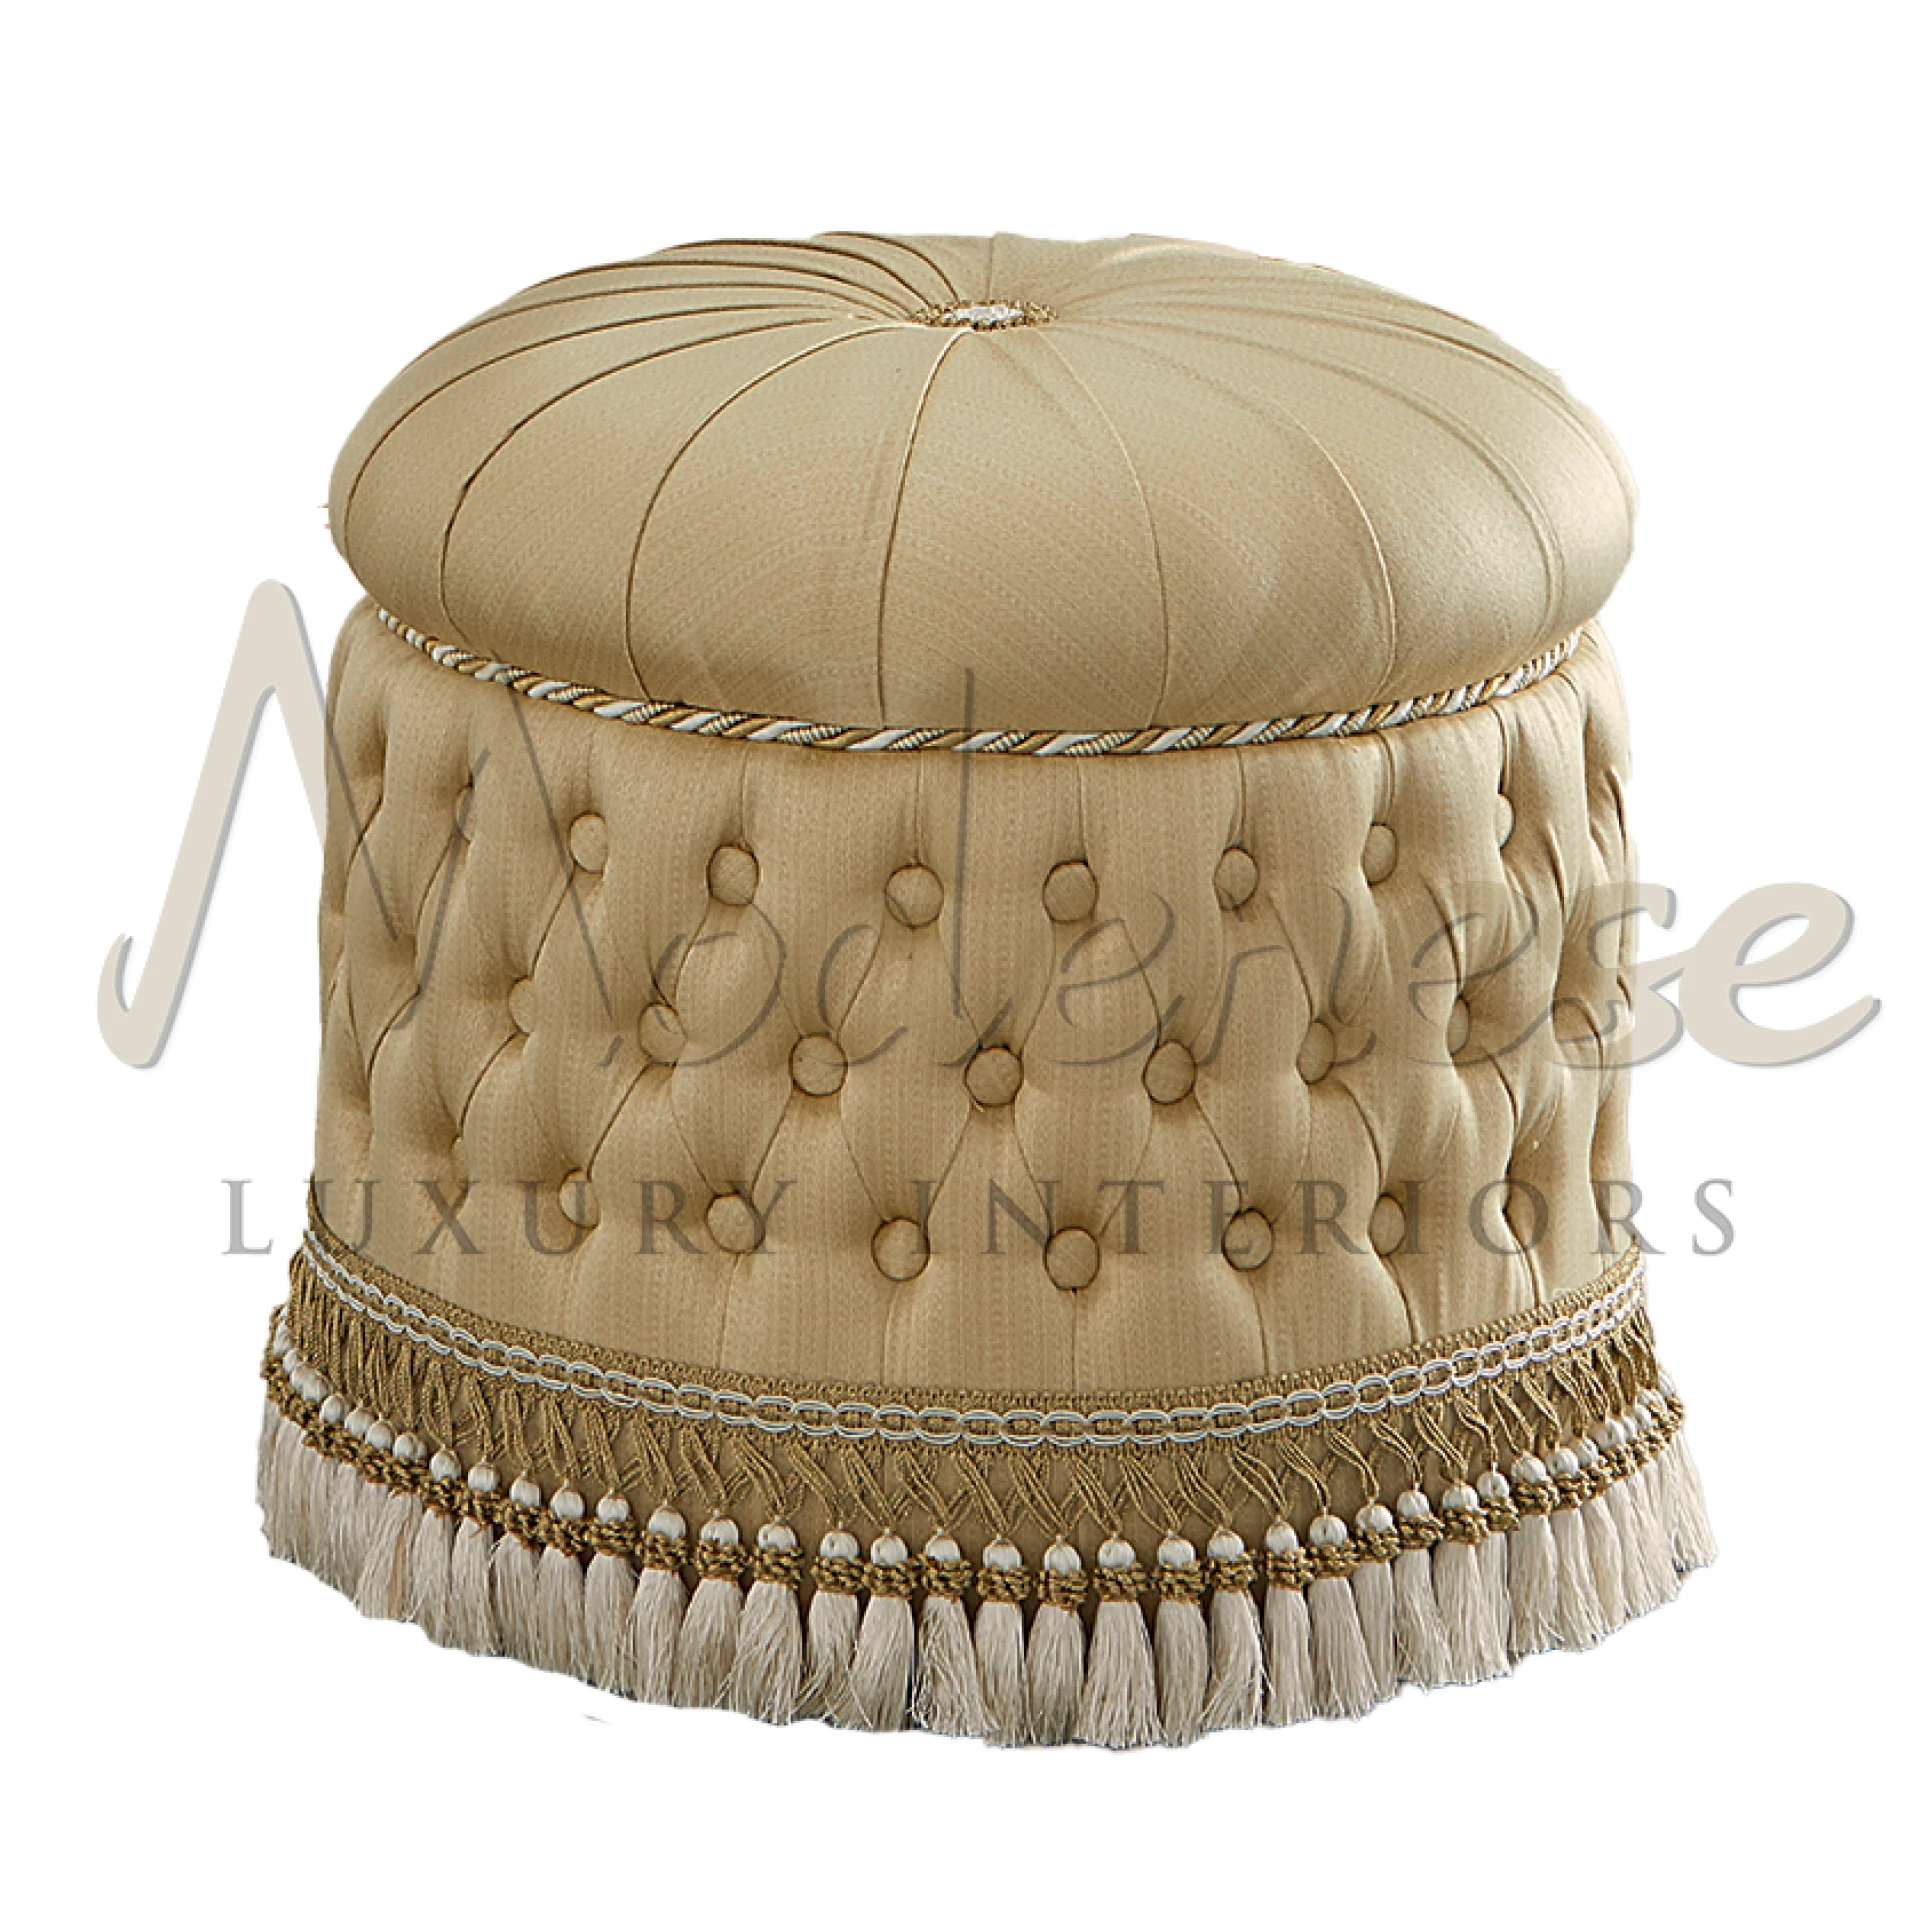 Indulge in luxurious comfort with our Bespoke Handmade Pouffe. Crafted with care, each piece exudes elegance and charm.